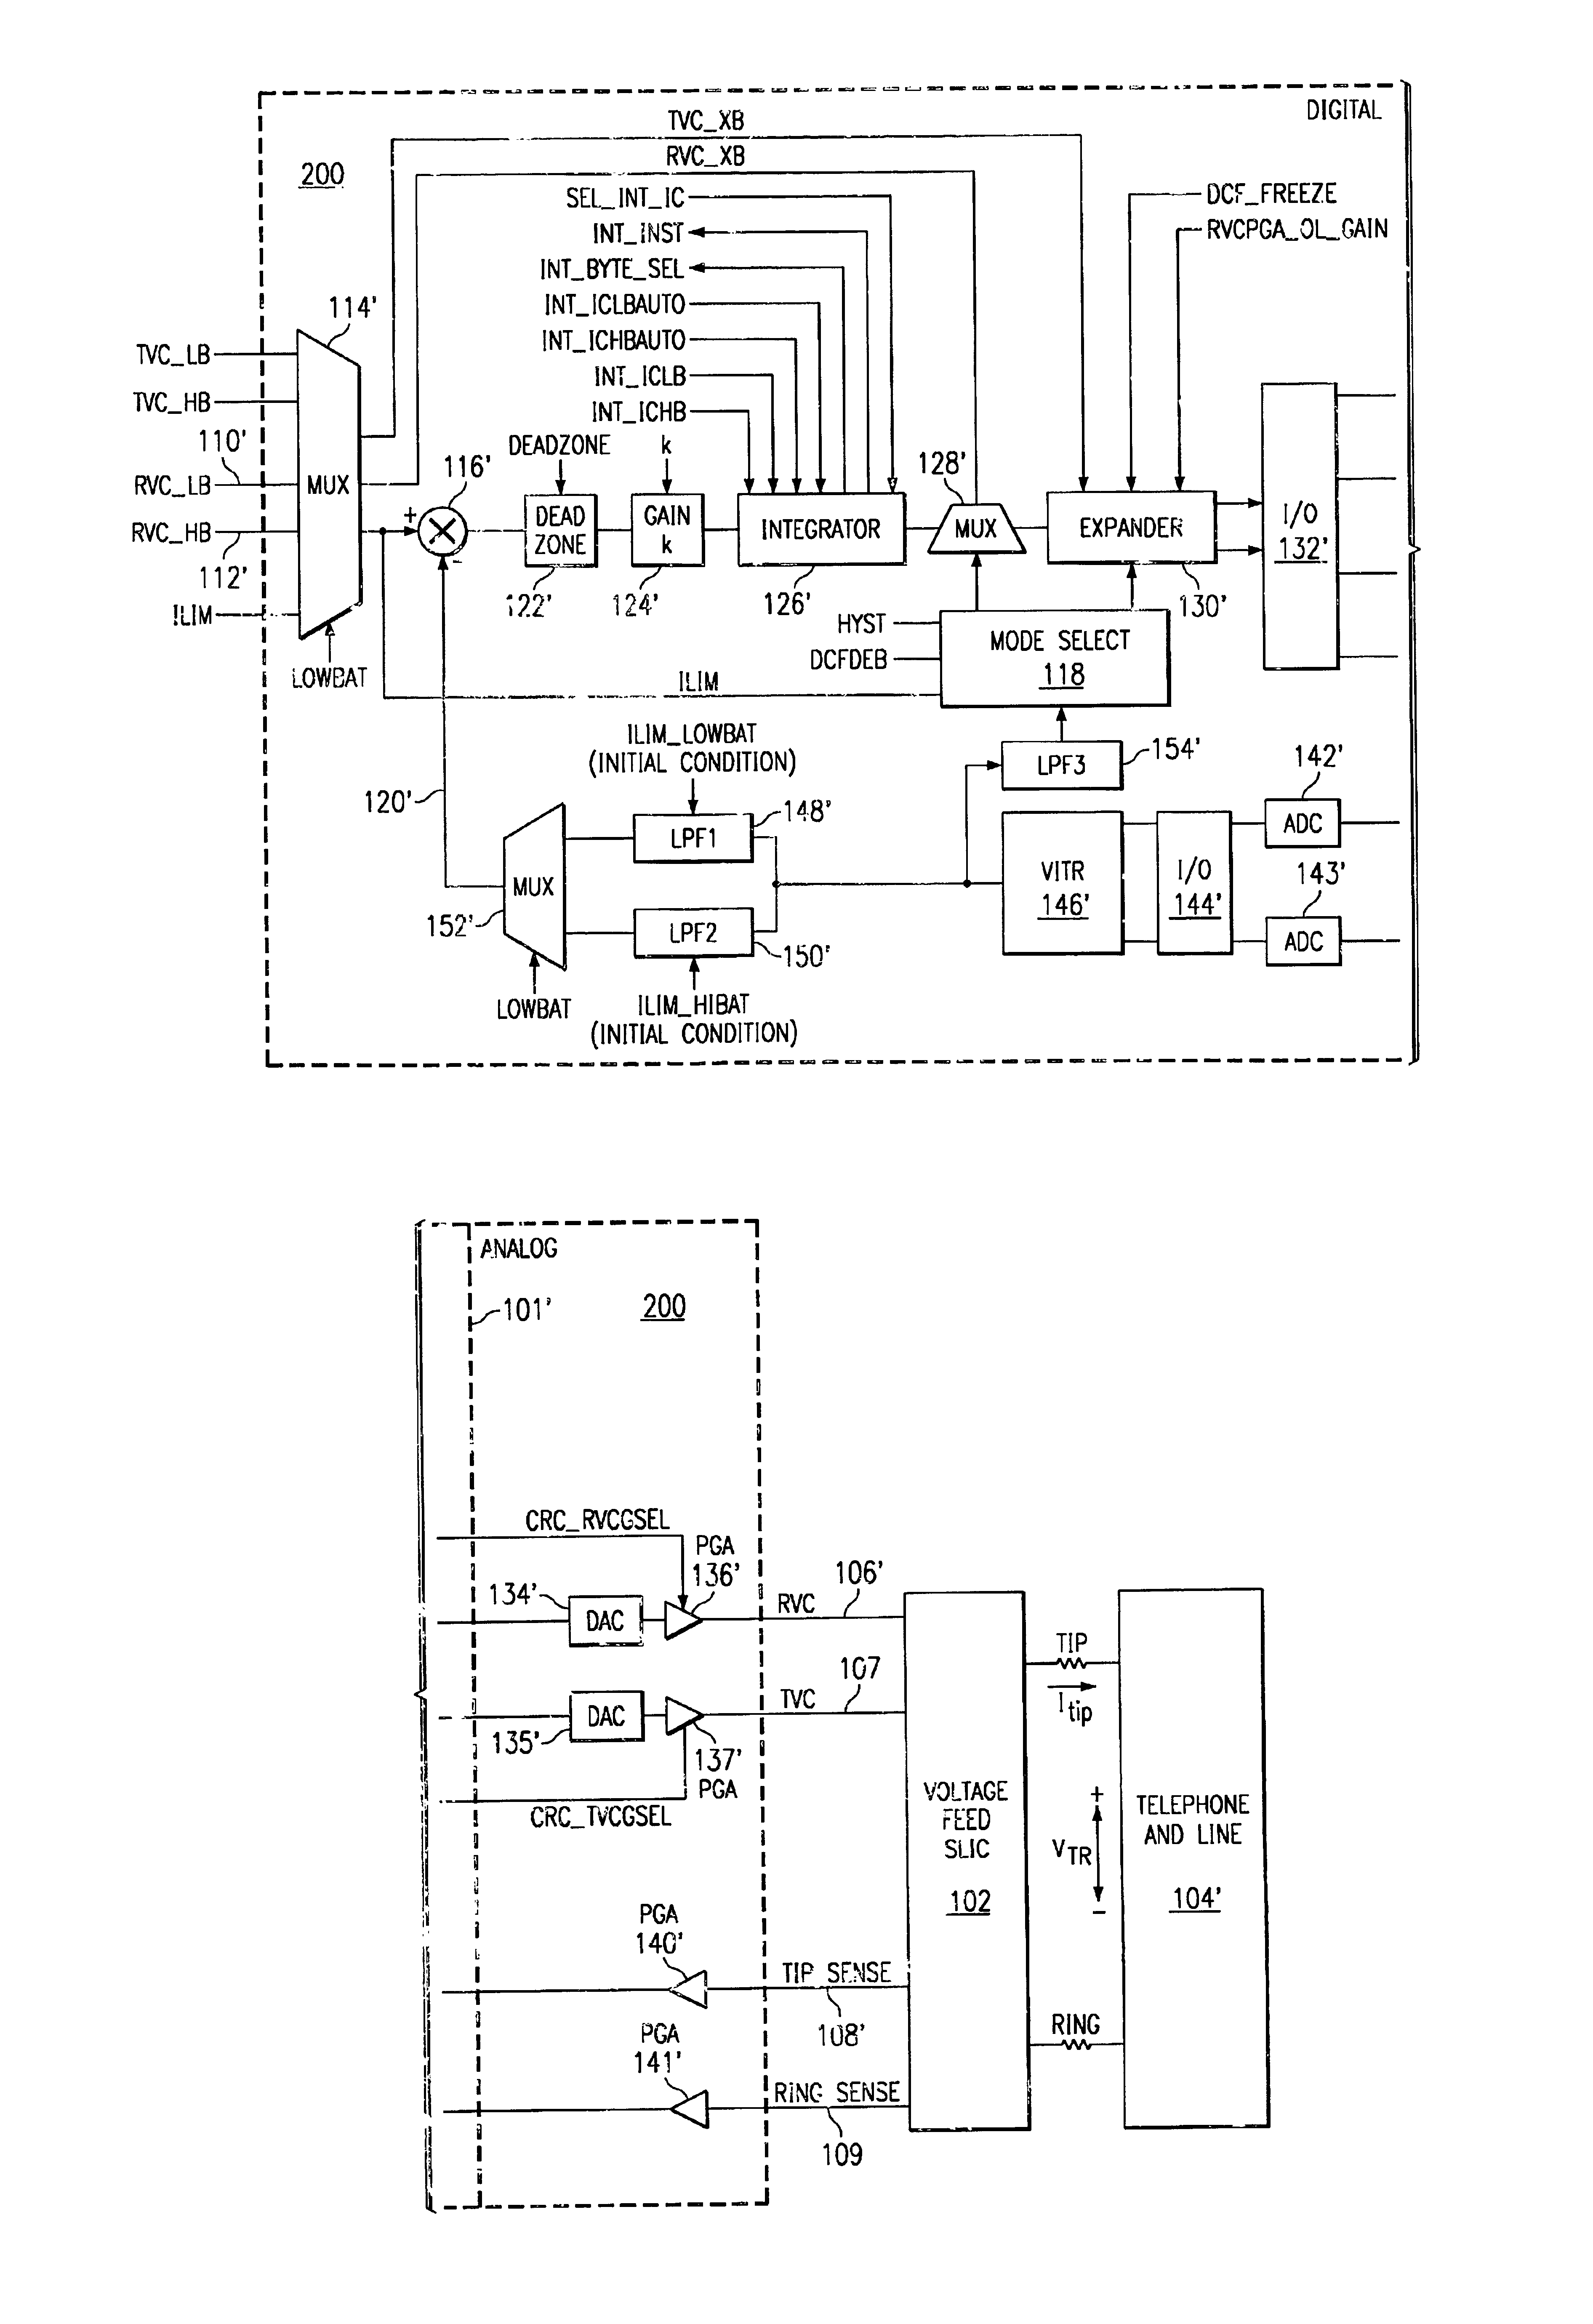 Hybrid DC-feed controller for a subscriber line interface circuit